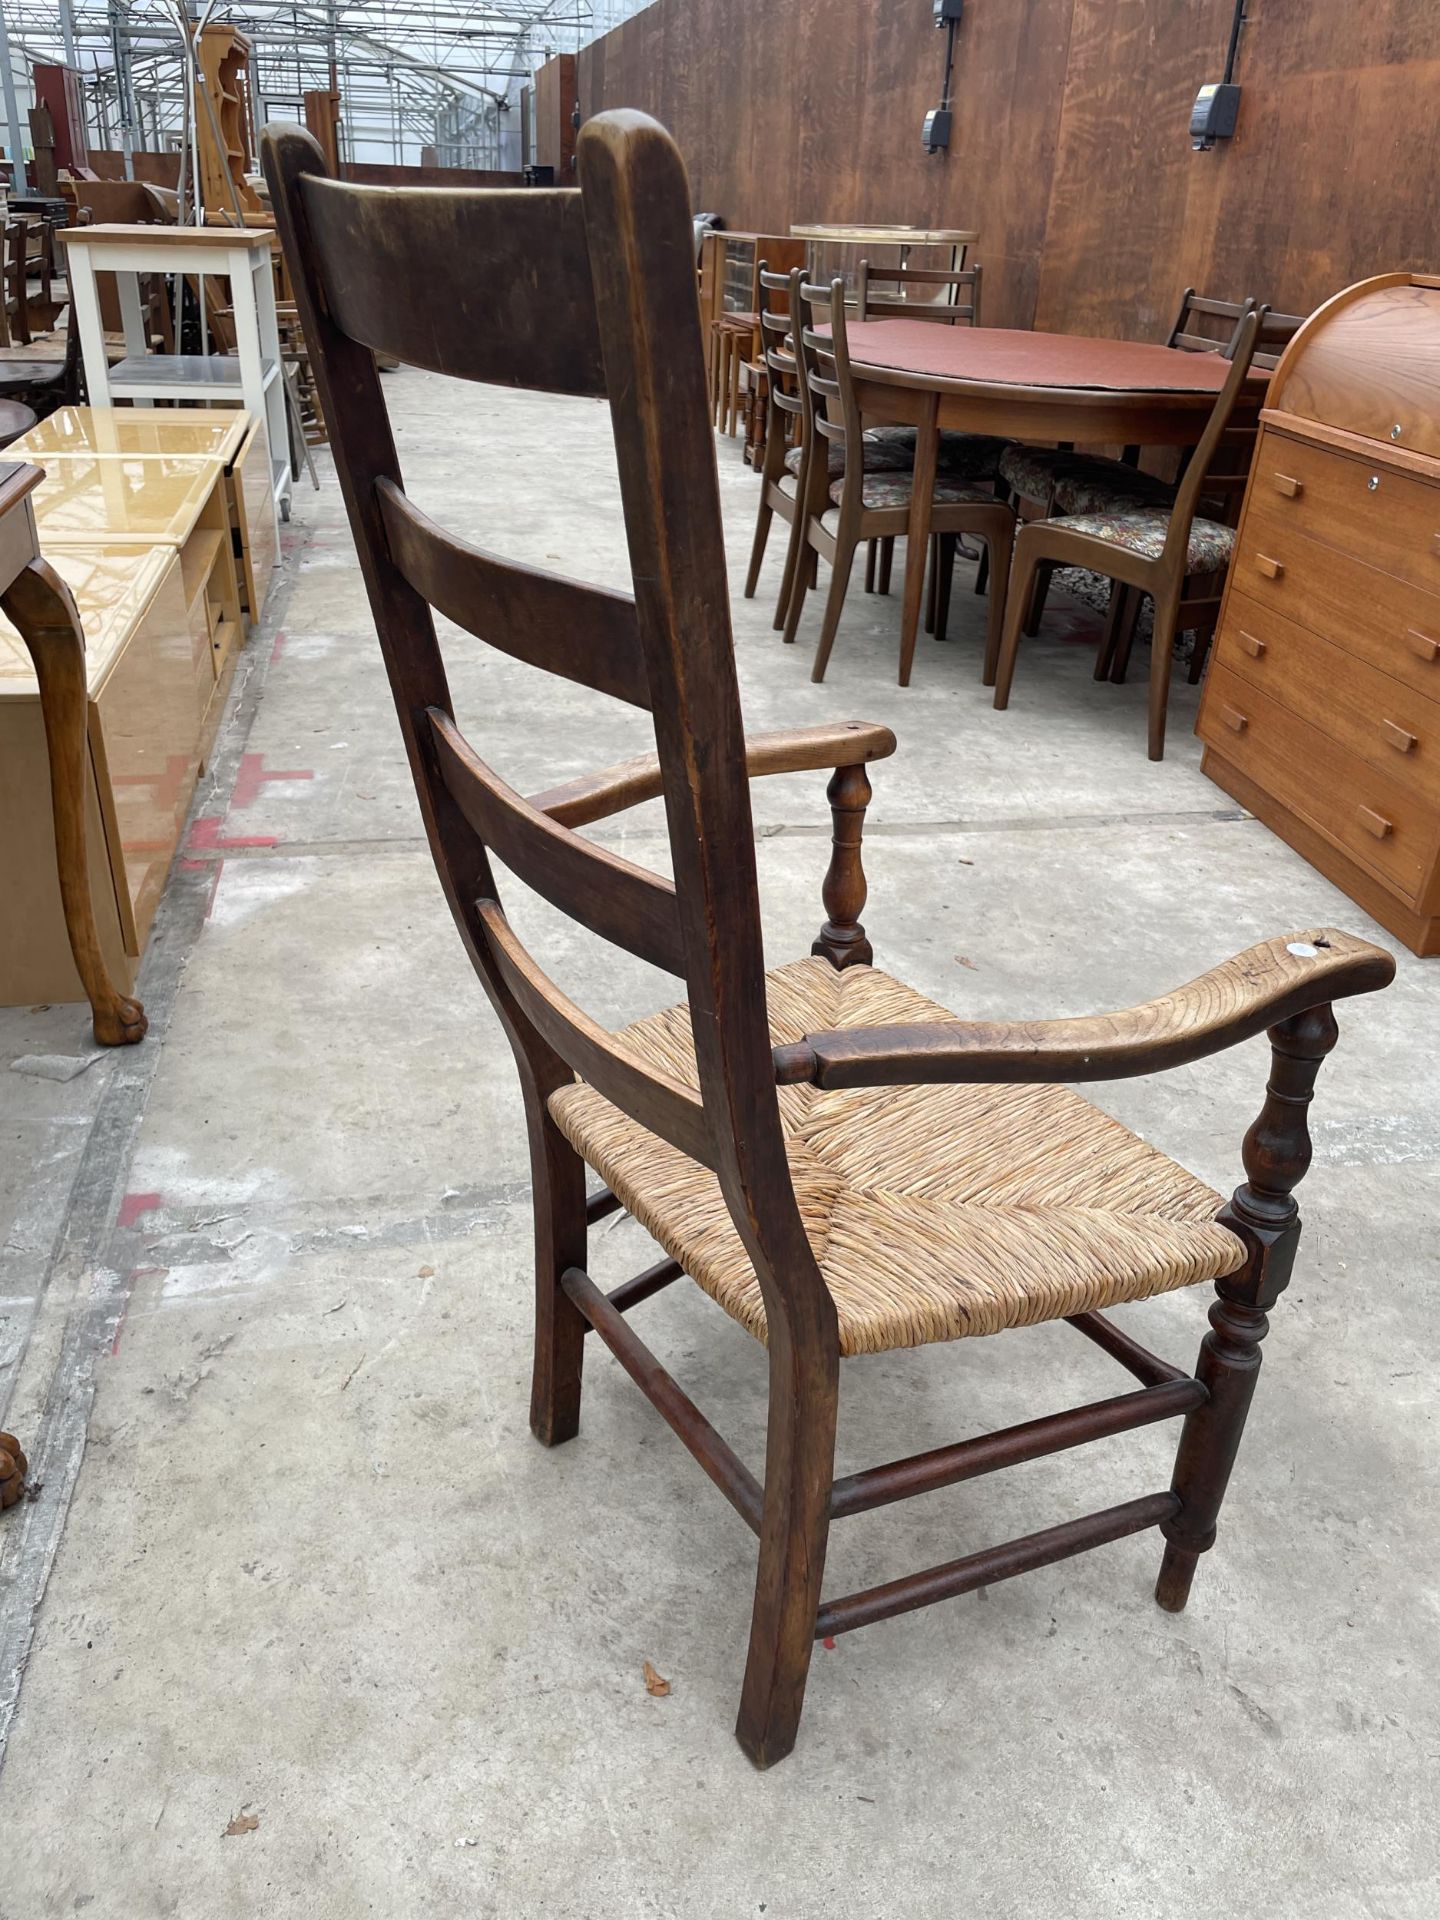 A 19TH CENTURY LADDERBACK ELBOW CHAIR WITH RUSH SEAT - Image 4 of 4